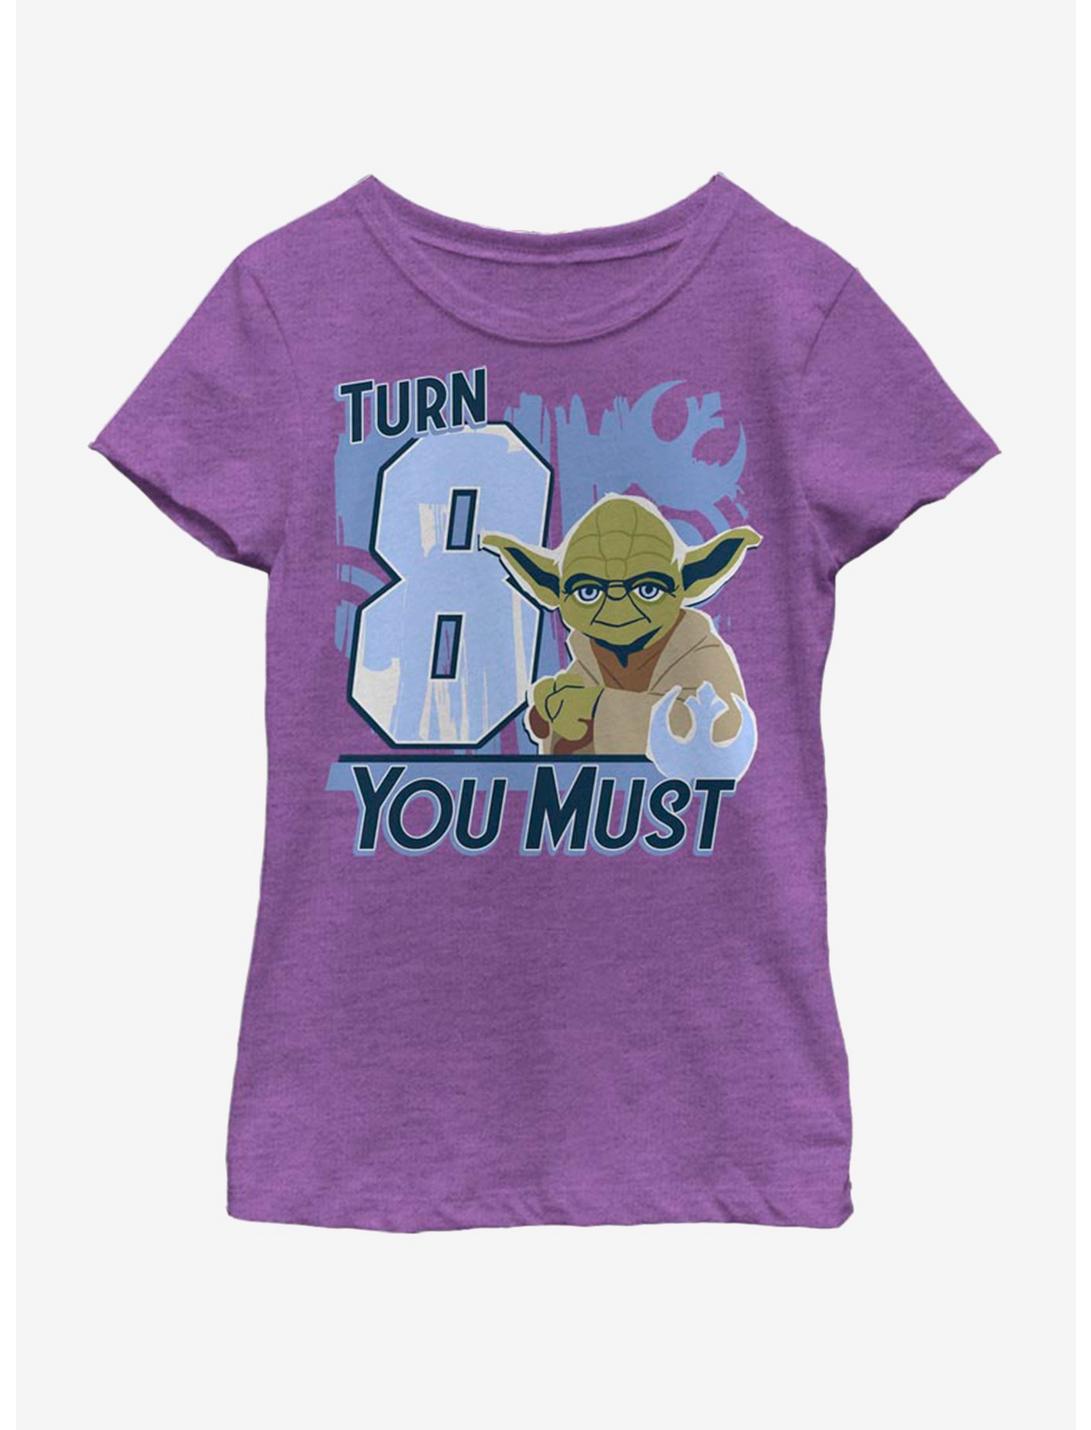 Star Wars Turn 8 You Must Youth Girls T-Shirt, PURPLE BERRY, hi-res